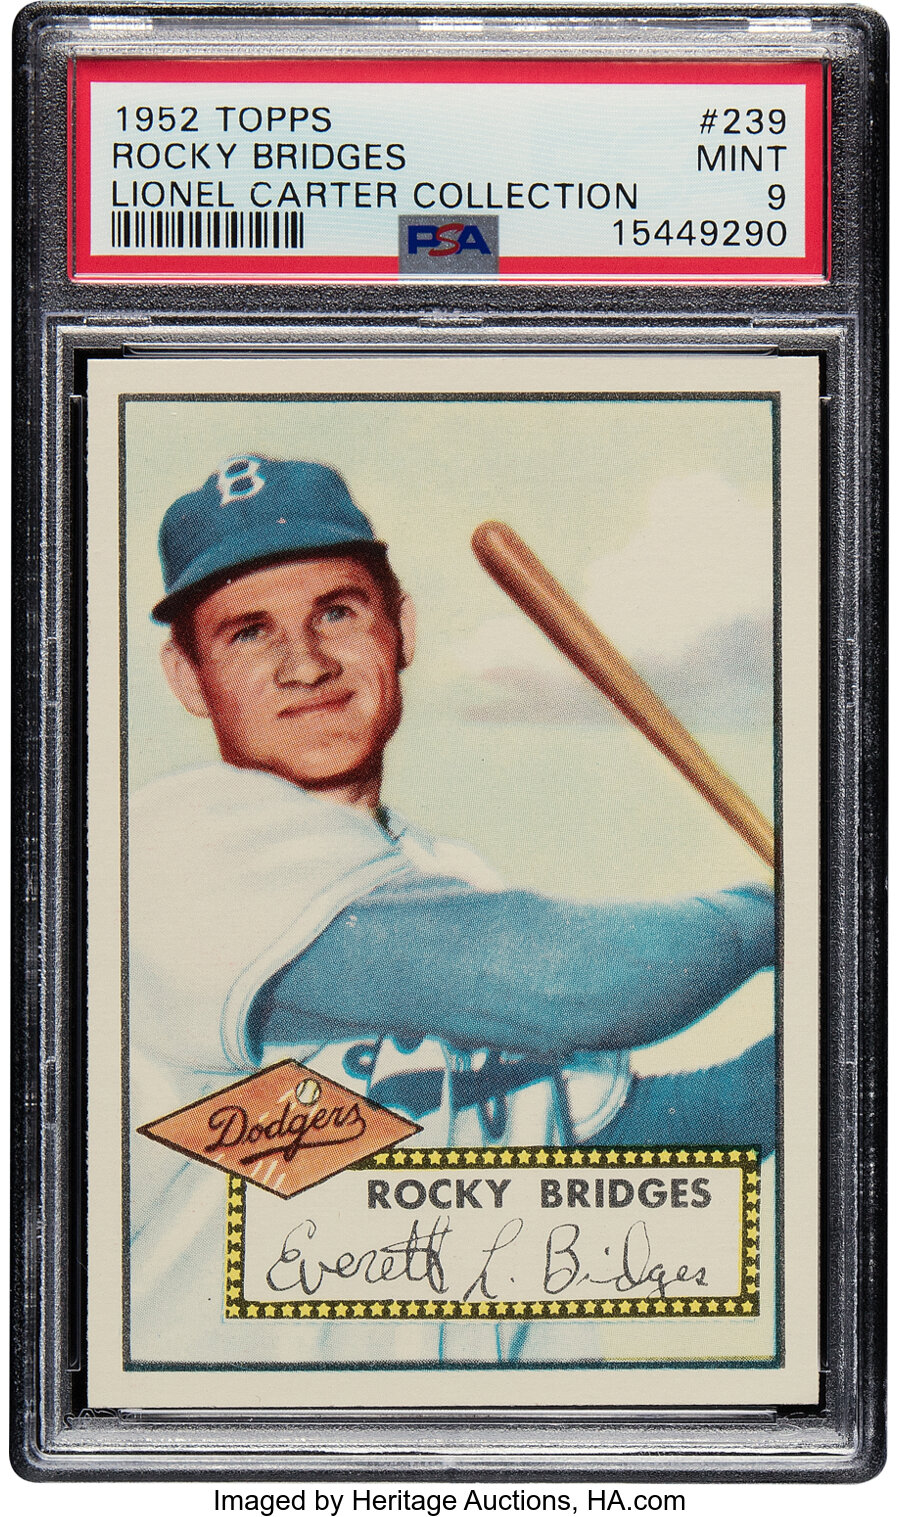 1952 Topps Rocky Bridges Rookie #239 PSA Mint 9 - Pop Four, None Superior! From the Lionel Carter Collection